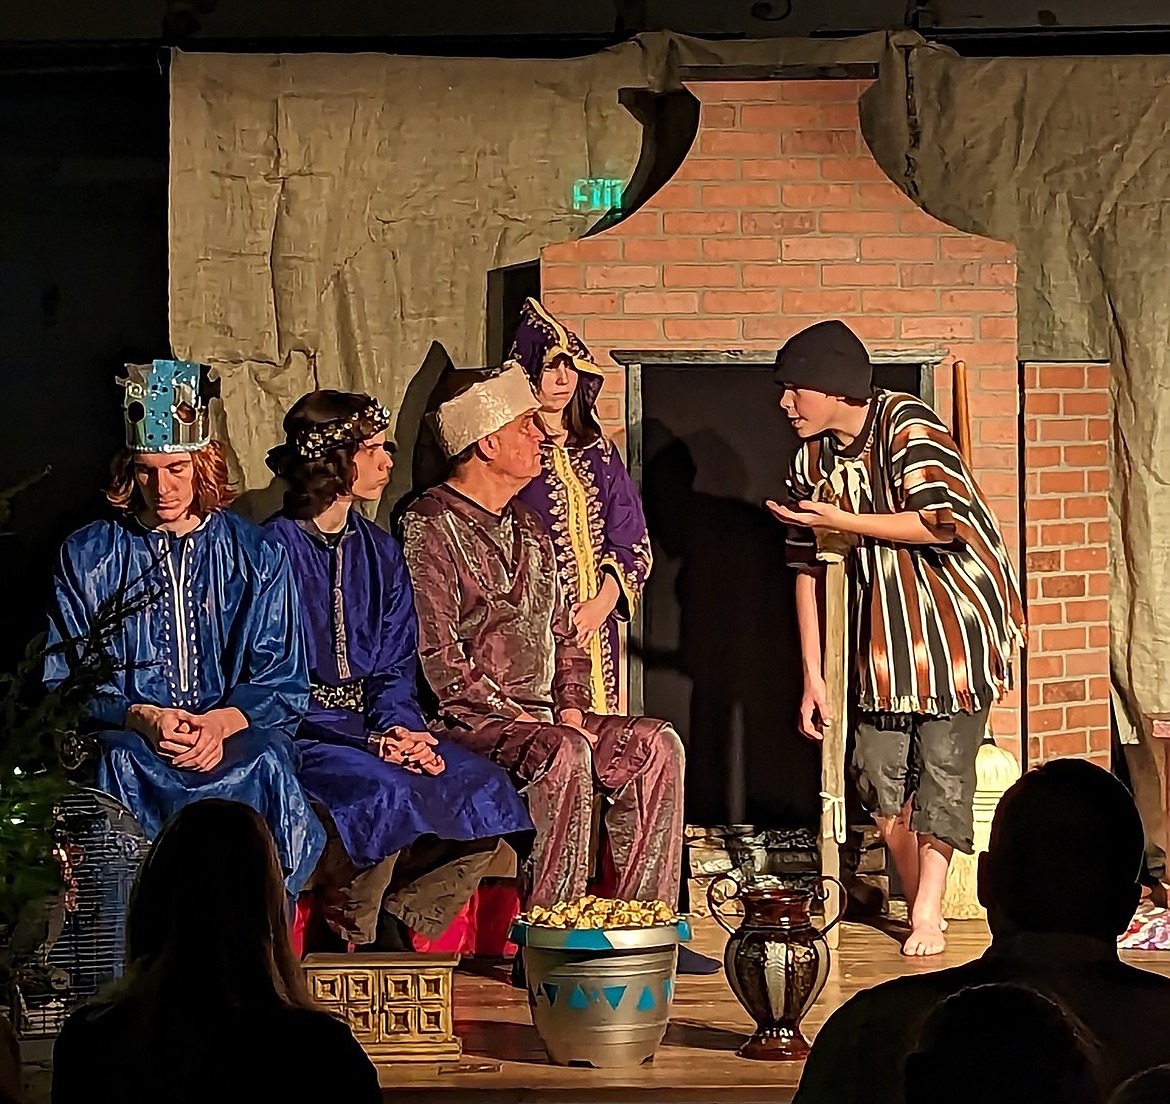 A scene from a past performance of "Amahl and the Night Visitors", a children's opera being presented by the Music Conservatory of Sandpoint on Dec. 21.